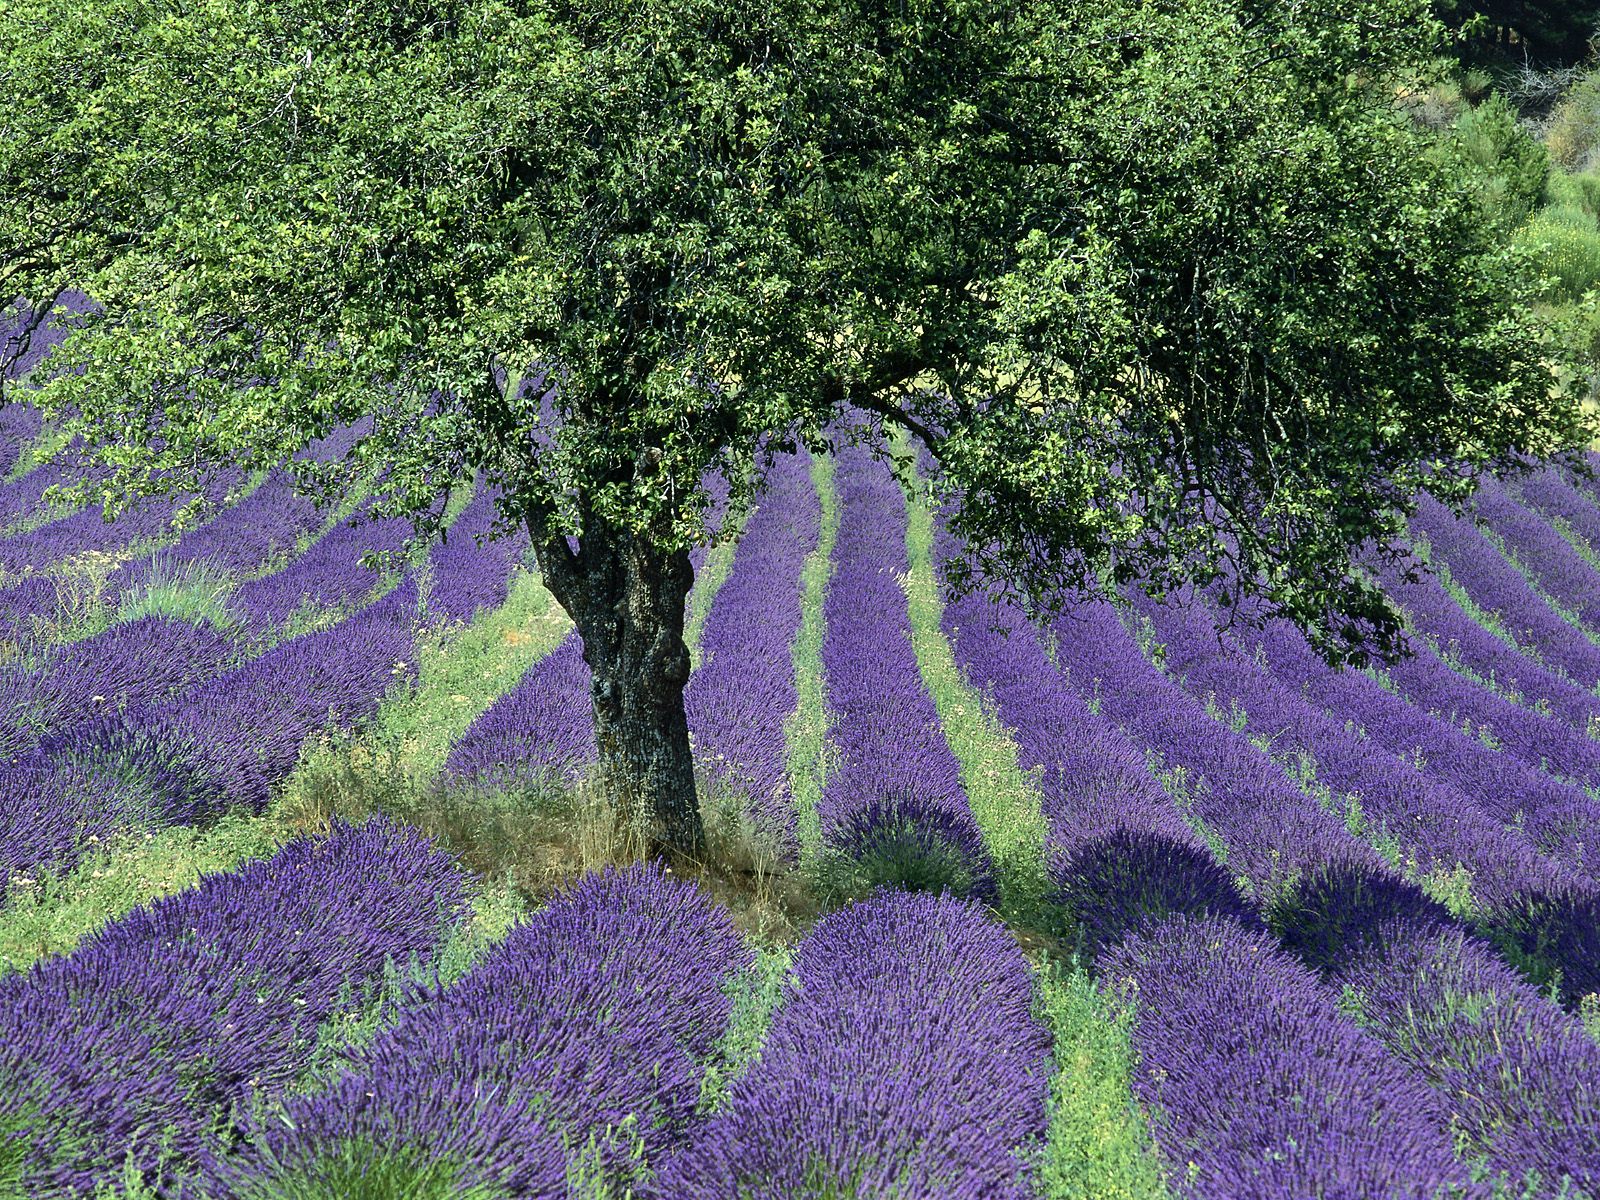  HQ Lavender Field Provence France Wallpaper   HQ Wallpapers 1600x1200